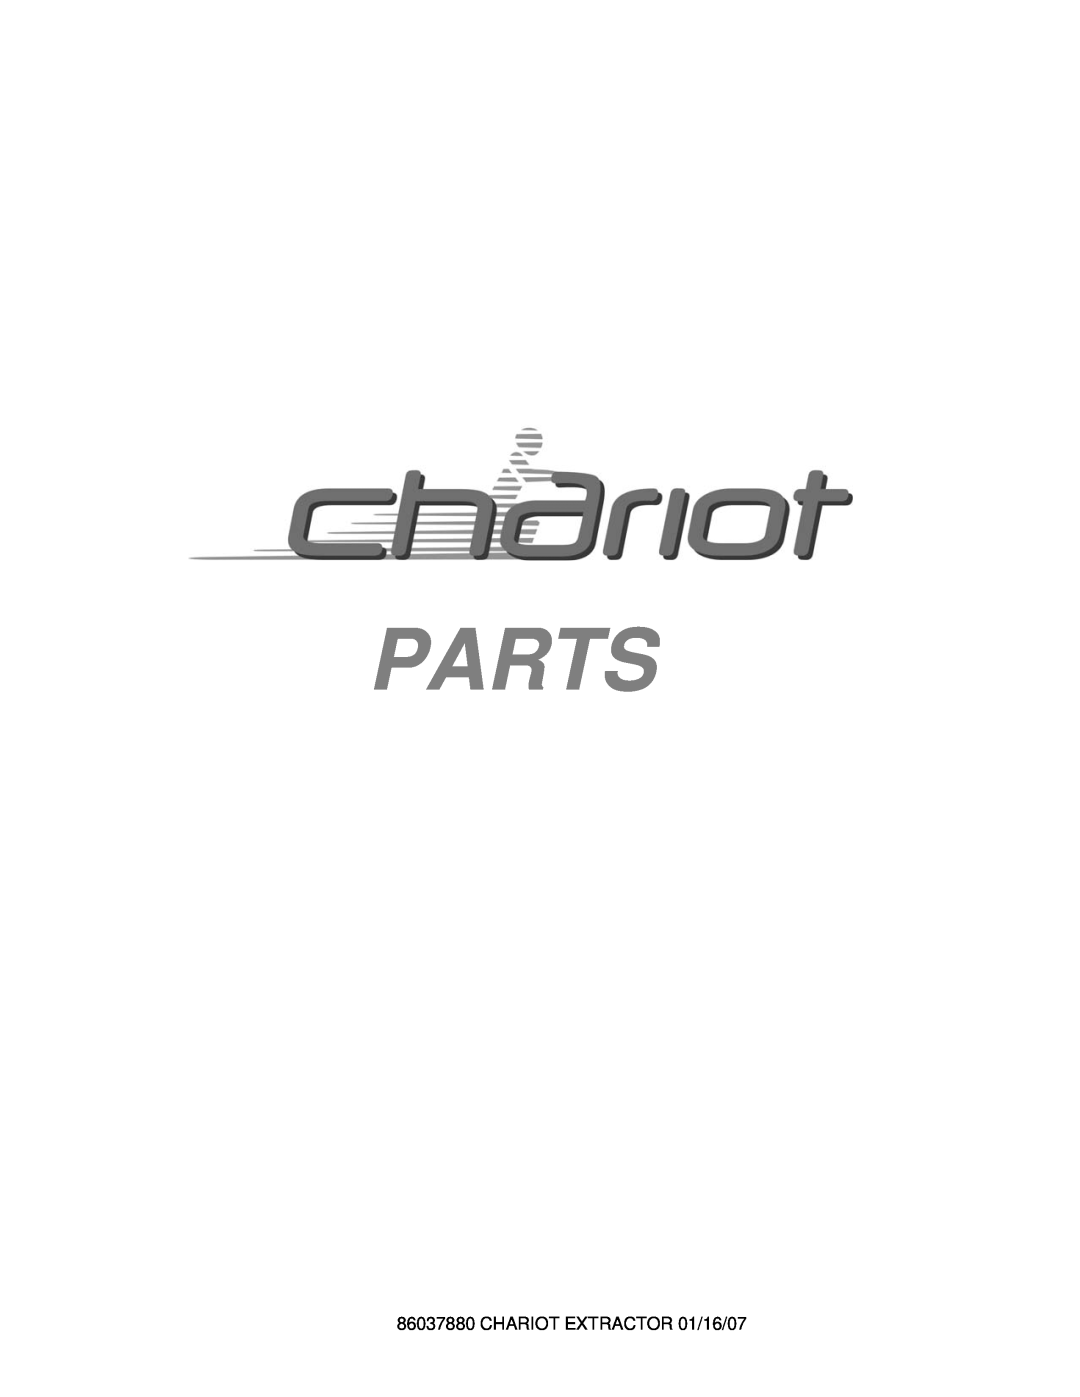 Windsor CEE24, 86037880, CE24X manual Parts, CHARIOT EXTRACTOR 01/16/07 